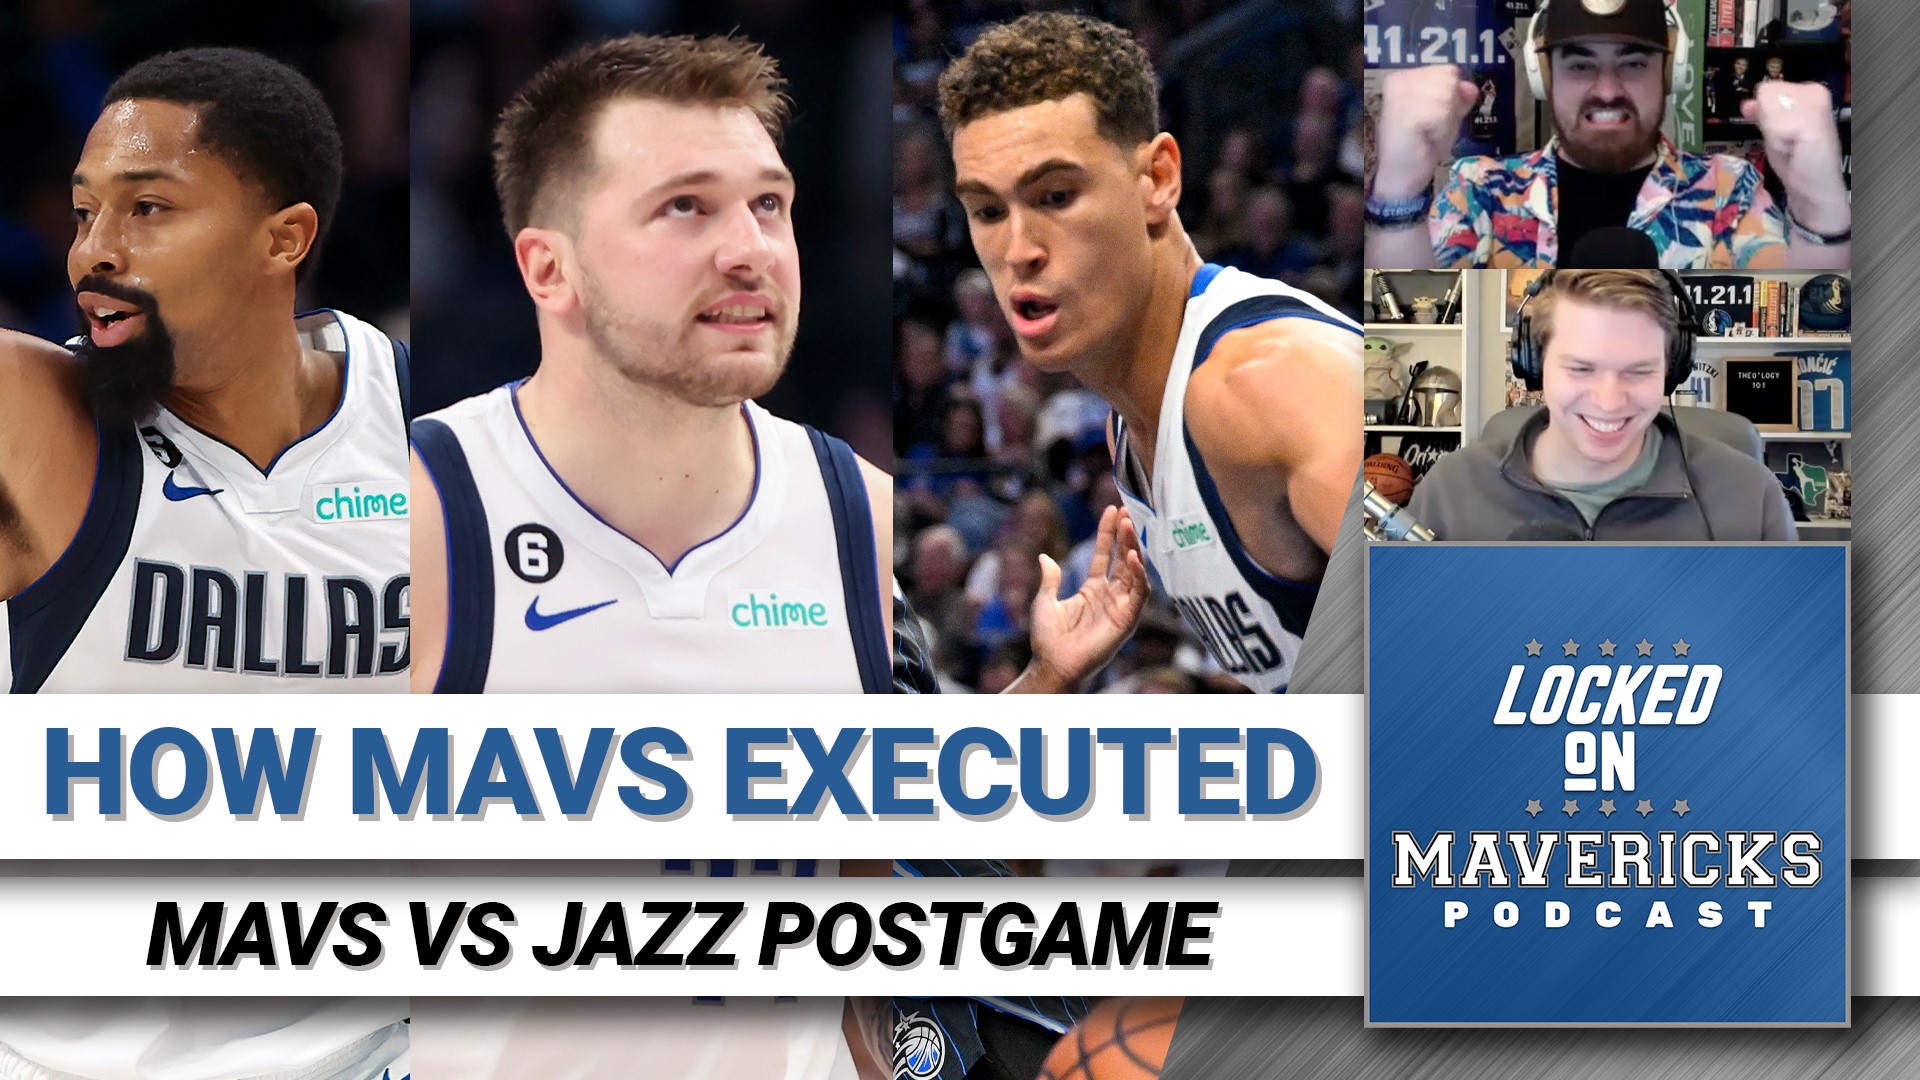 Nick Angstadt & Isaac Harris breakdown the Mavs win over the Jazz and how the Mavs executed down the stretch. How did Luka Doncic score 30 again and make history?